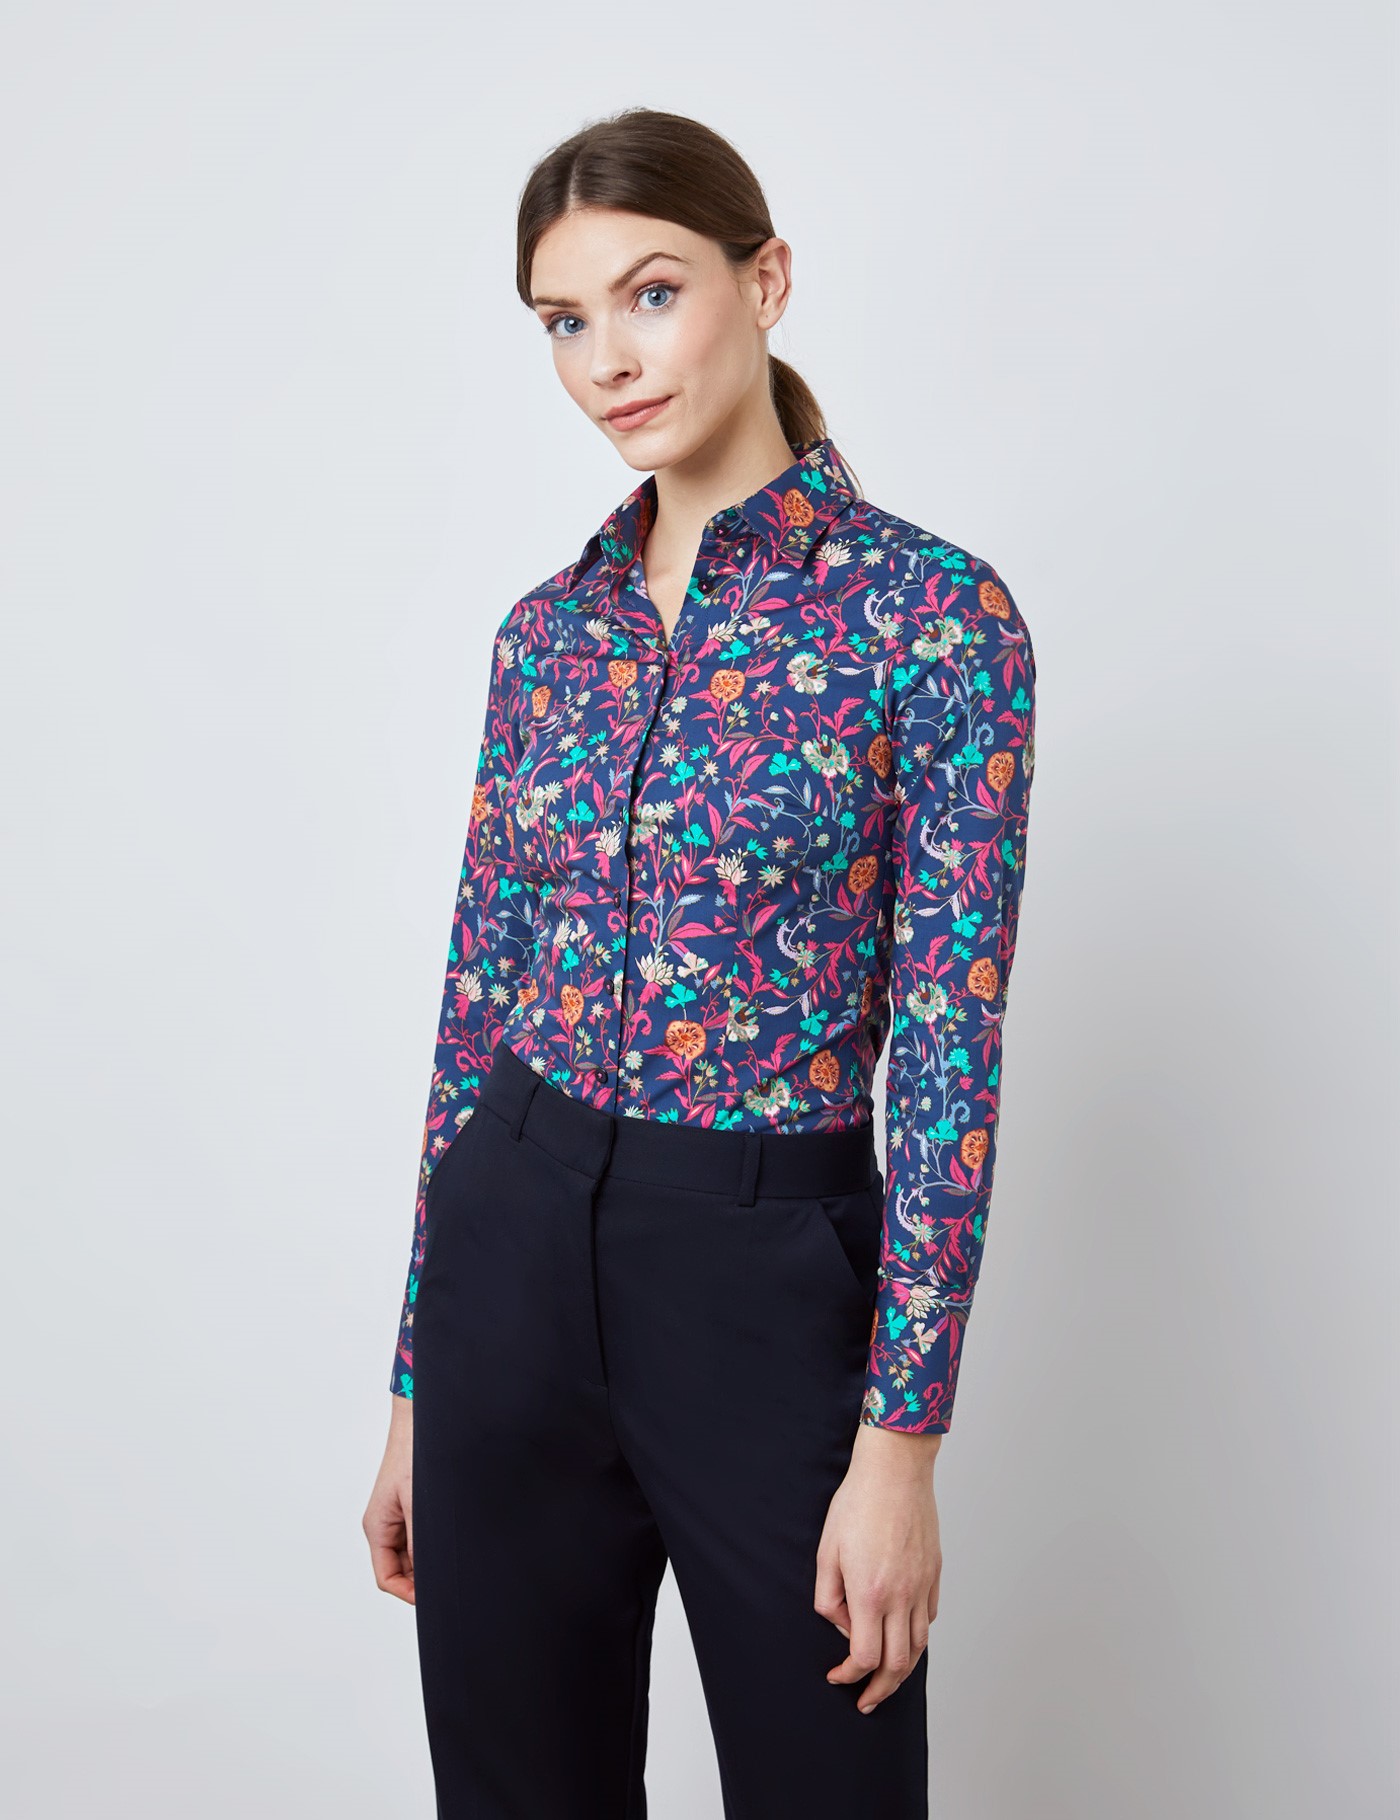 Cotton Stretch Women's Fitted Shirt with Floral Print and Single Cuff ...